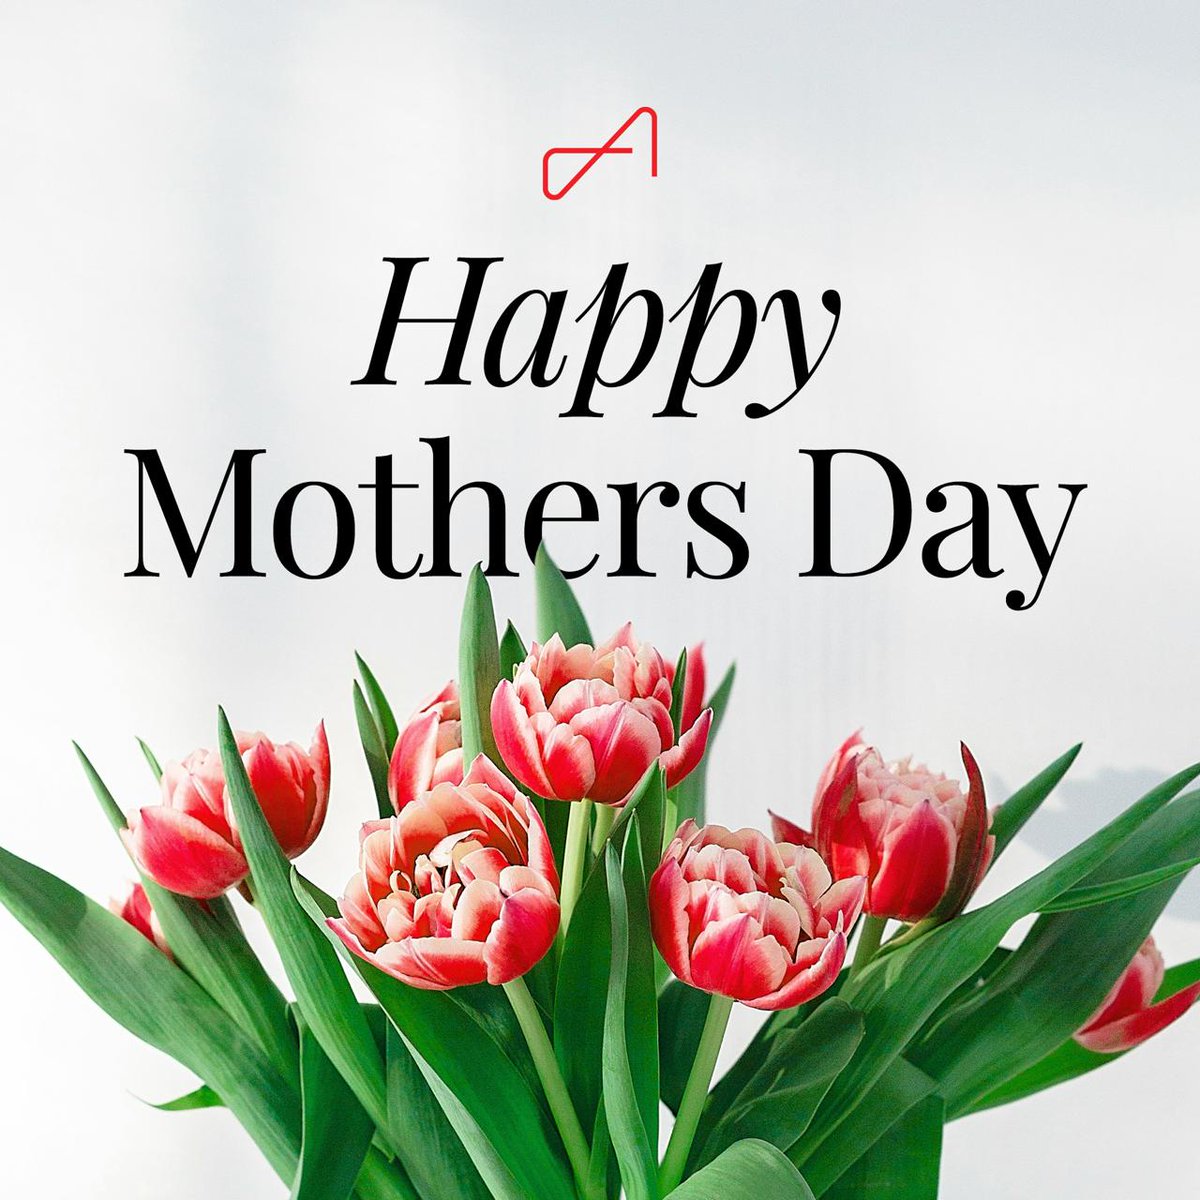 Happy Mother's Day to all the incredible moms out there! Your love makes every house a home. 💖 

Martin Posch
#OhMyPosch
📩 Martin@TheAgencyLosCabos.com
📍 #realestate #loscabos #CaboRealEstate #MothersDay #HomeSweetHome